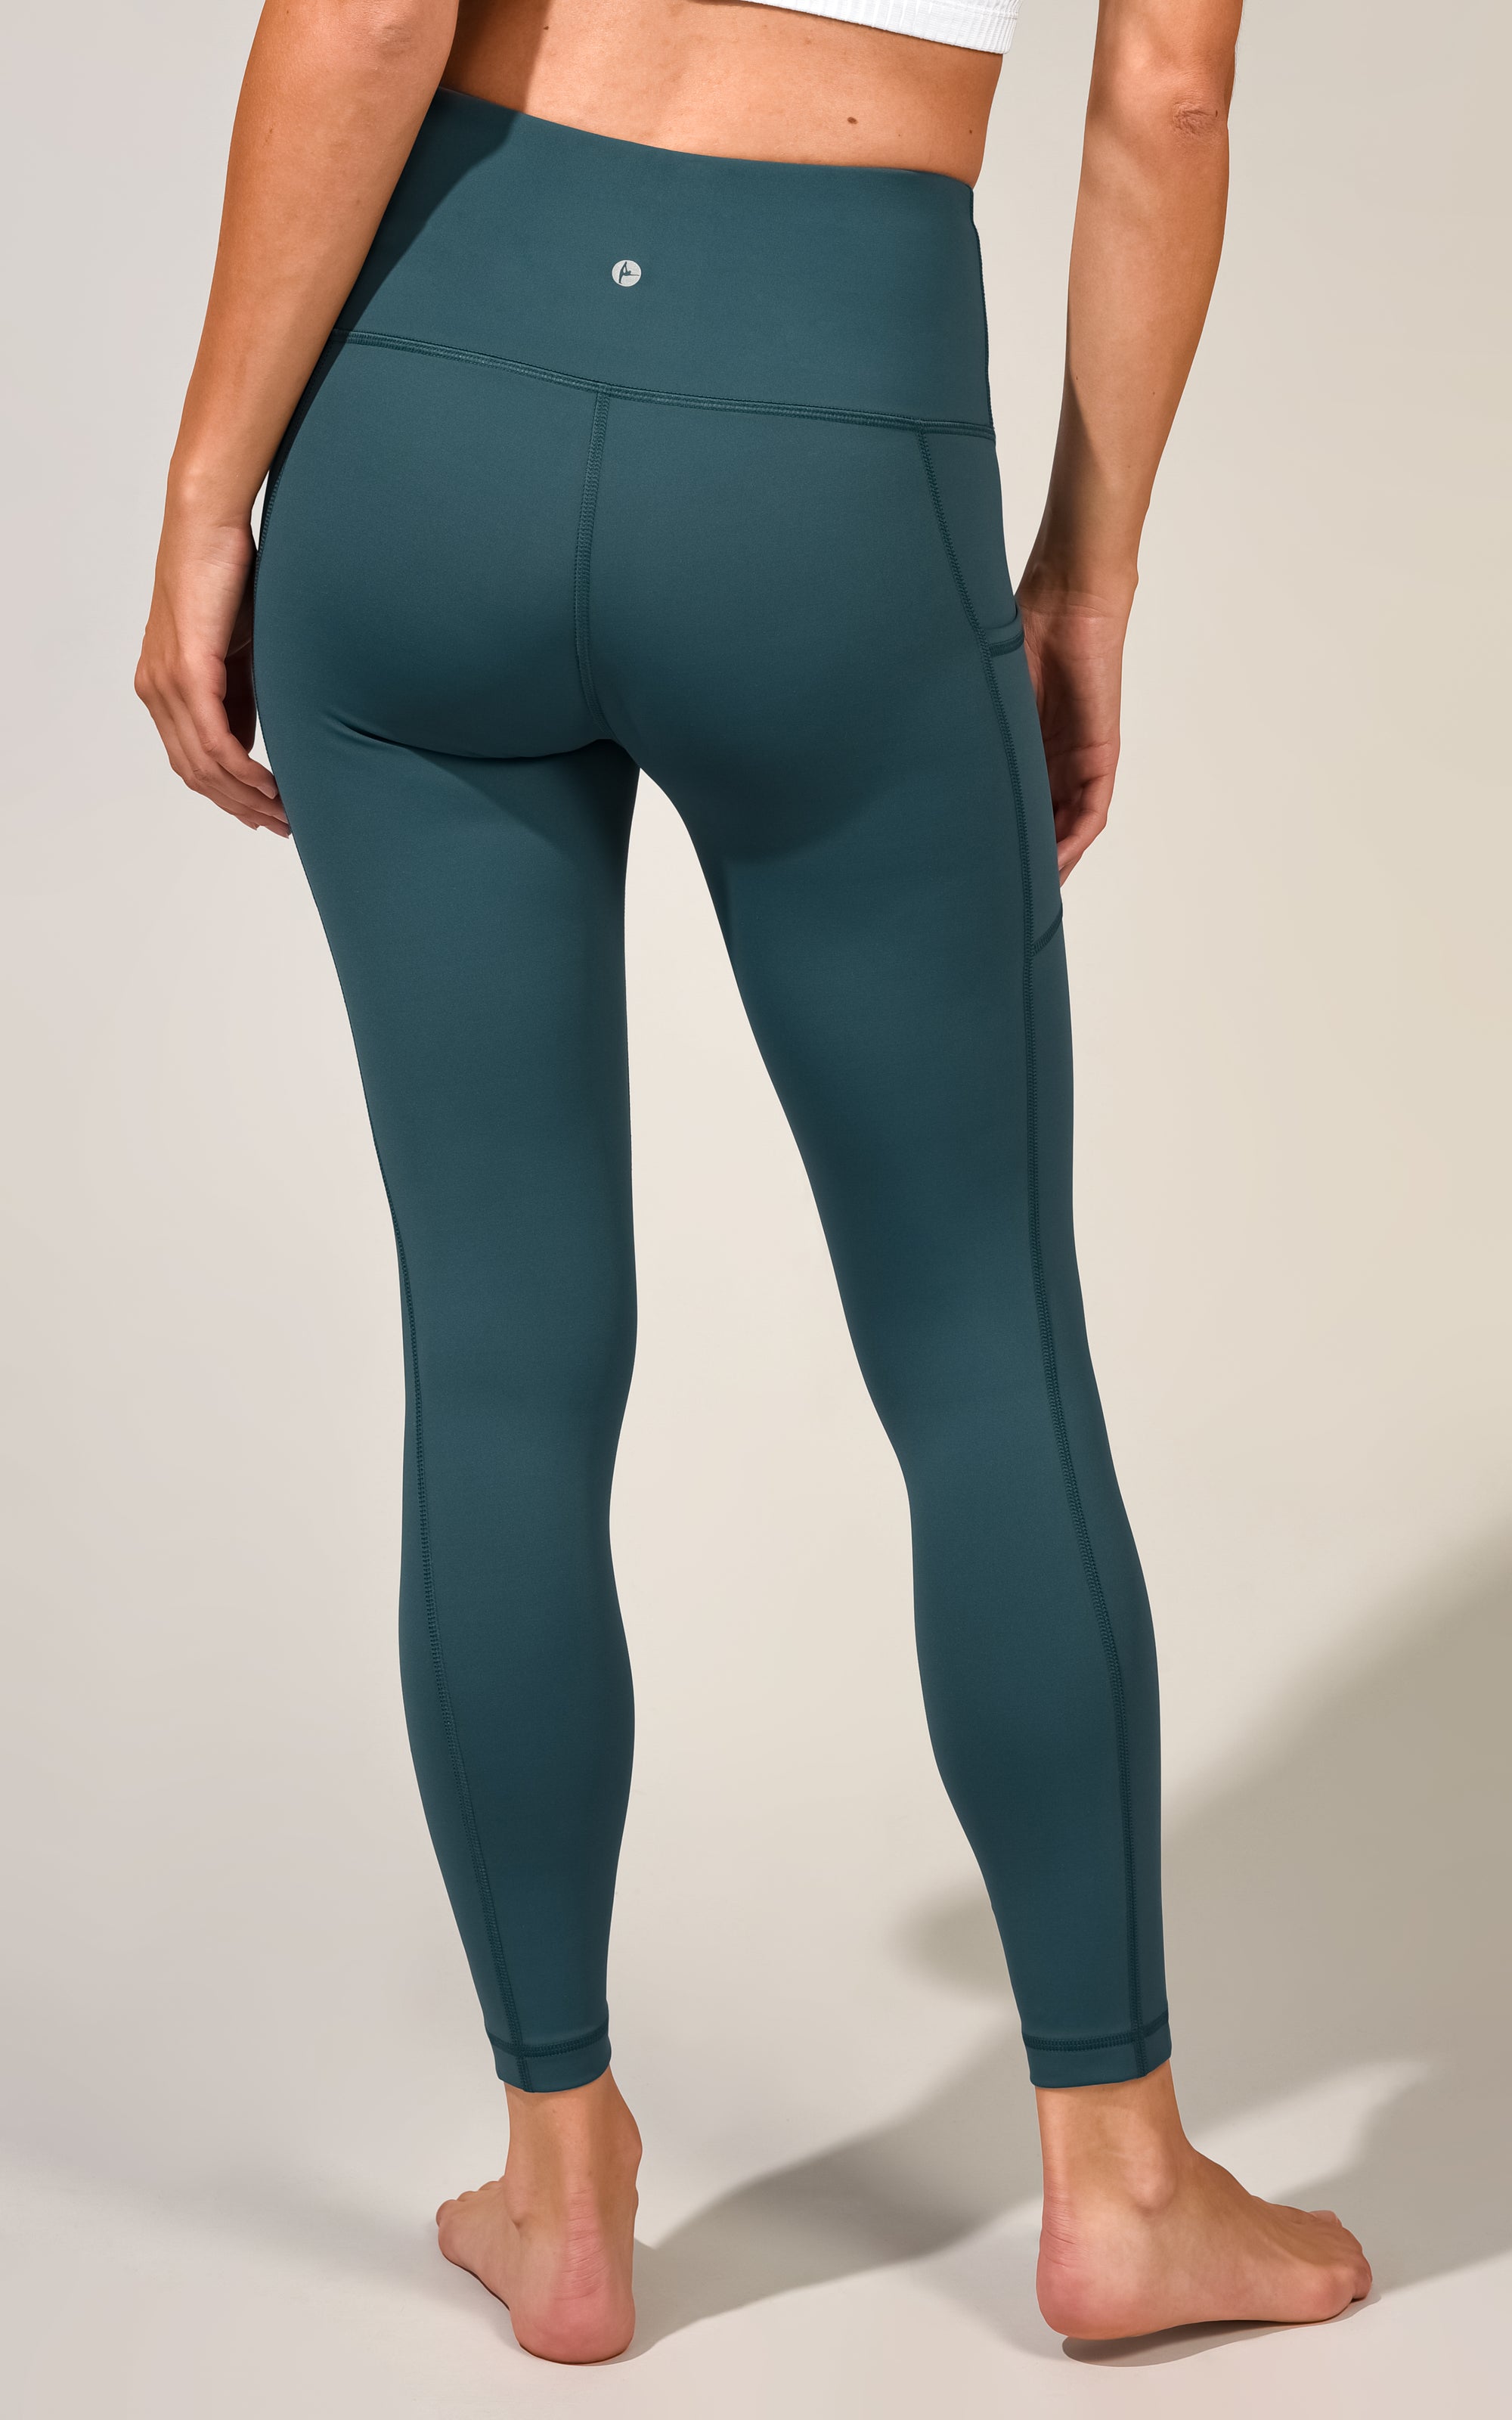 Black High Waisted 90 degree by reflex leggings Style PW79931 - Helia Beer  Co